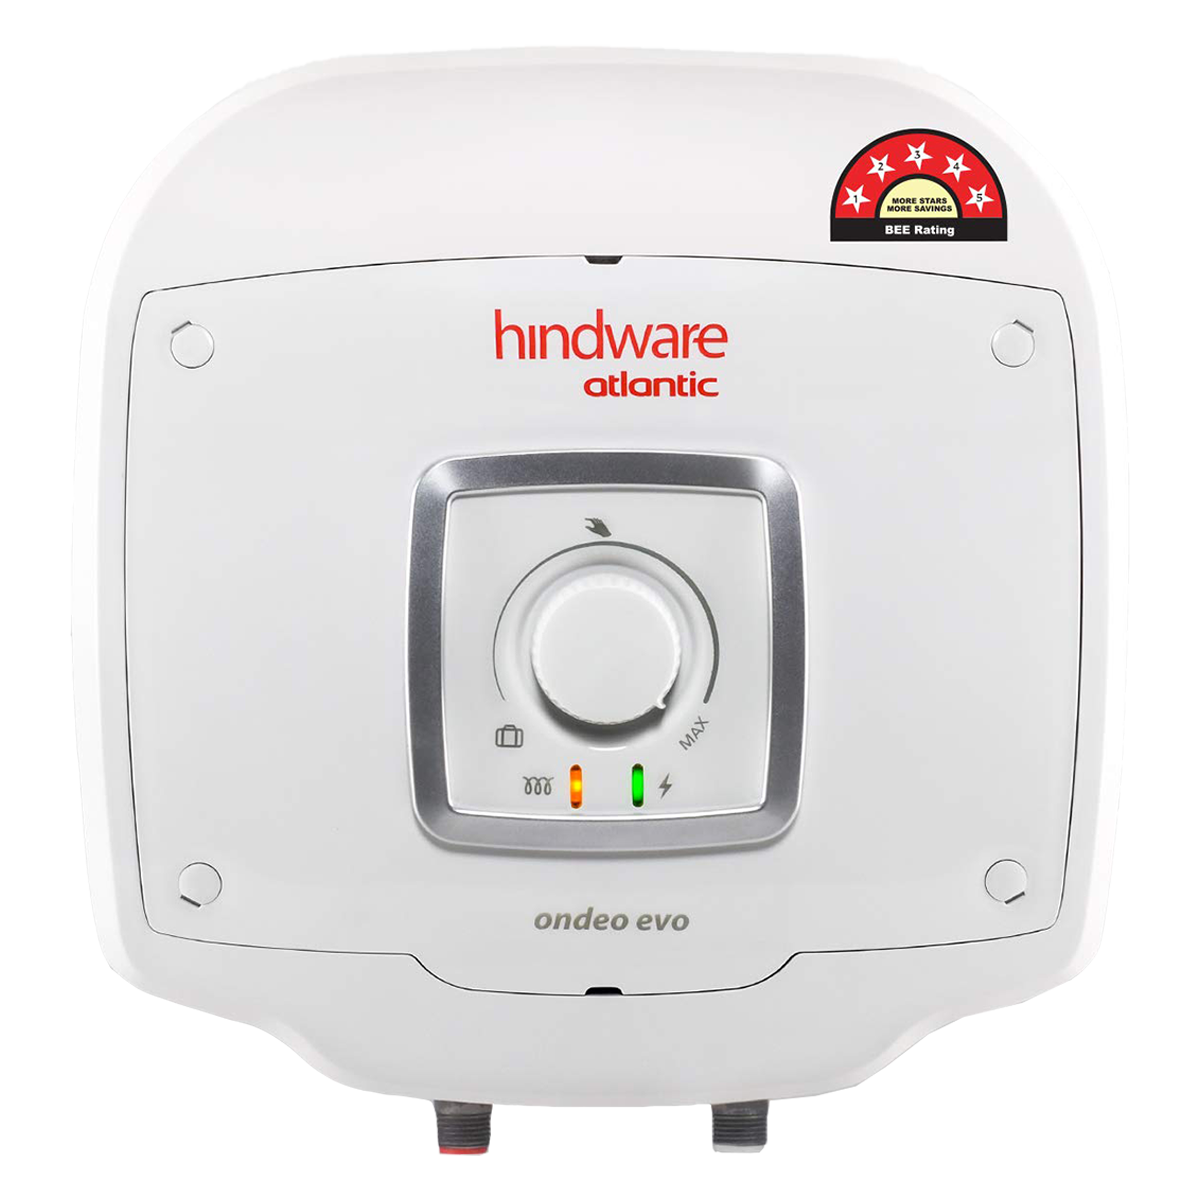 Hindware Atlantic Ondeo Evo 15 Litres 5 Star Rating Storage Water Heater (240 Watts, SWH 15A-2 M-2, White)_1